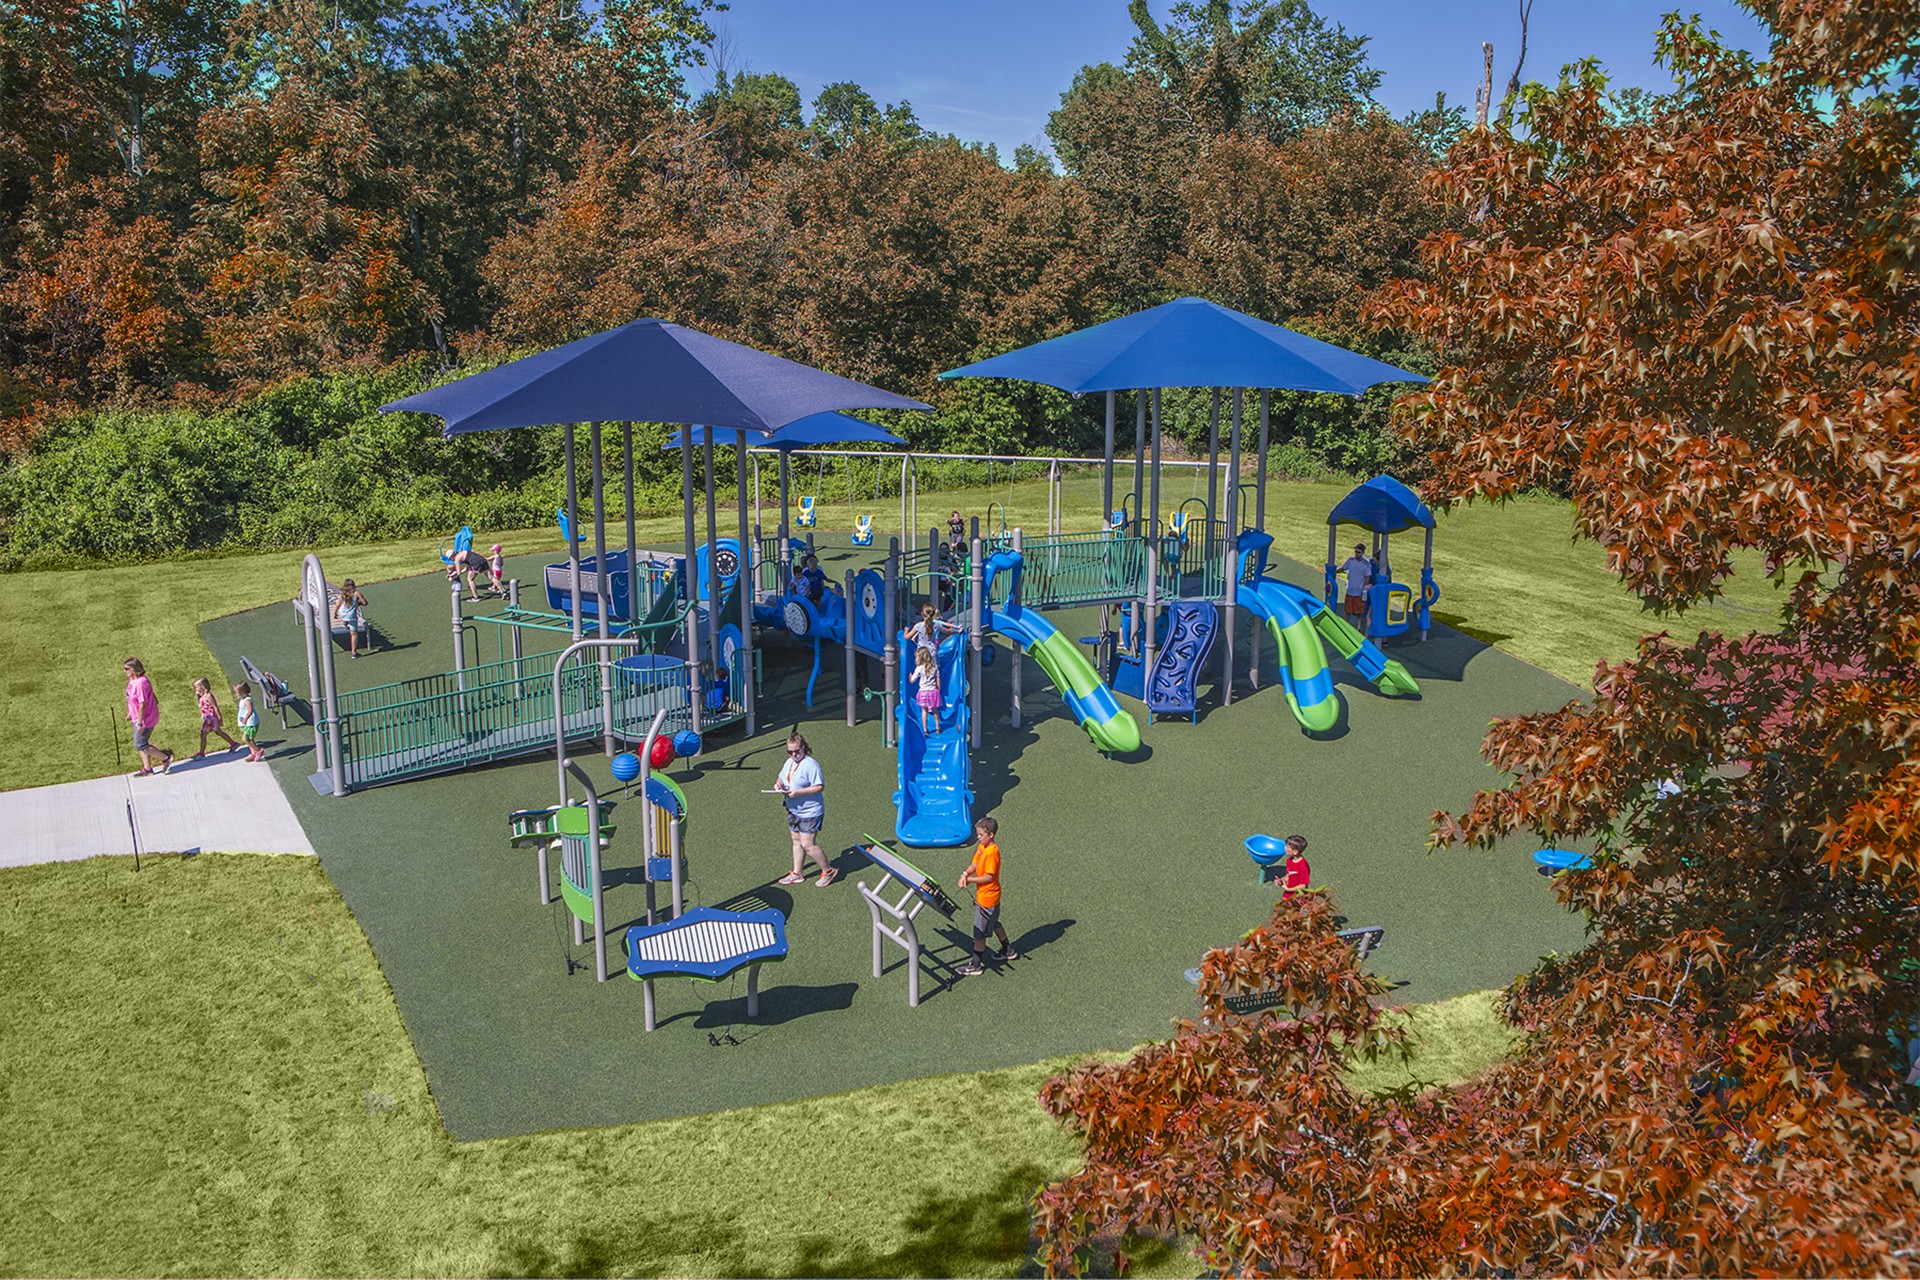 Featured image of aerial shot of a blue and green colored park with children playing on it during the fall